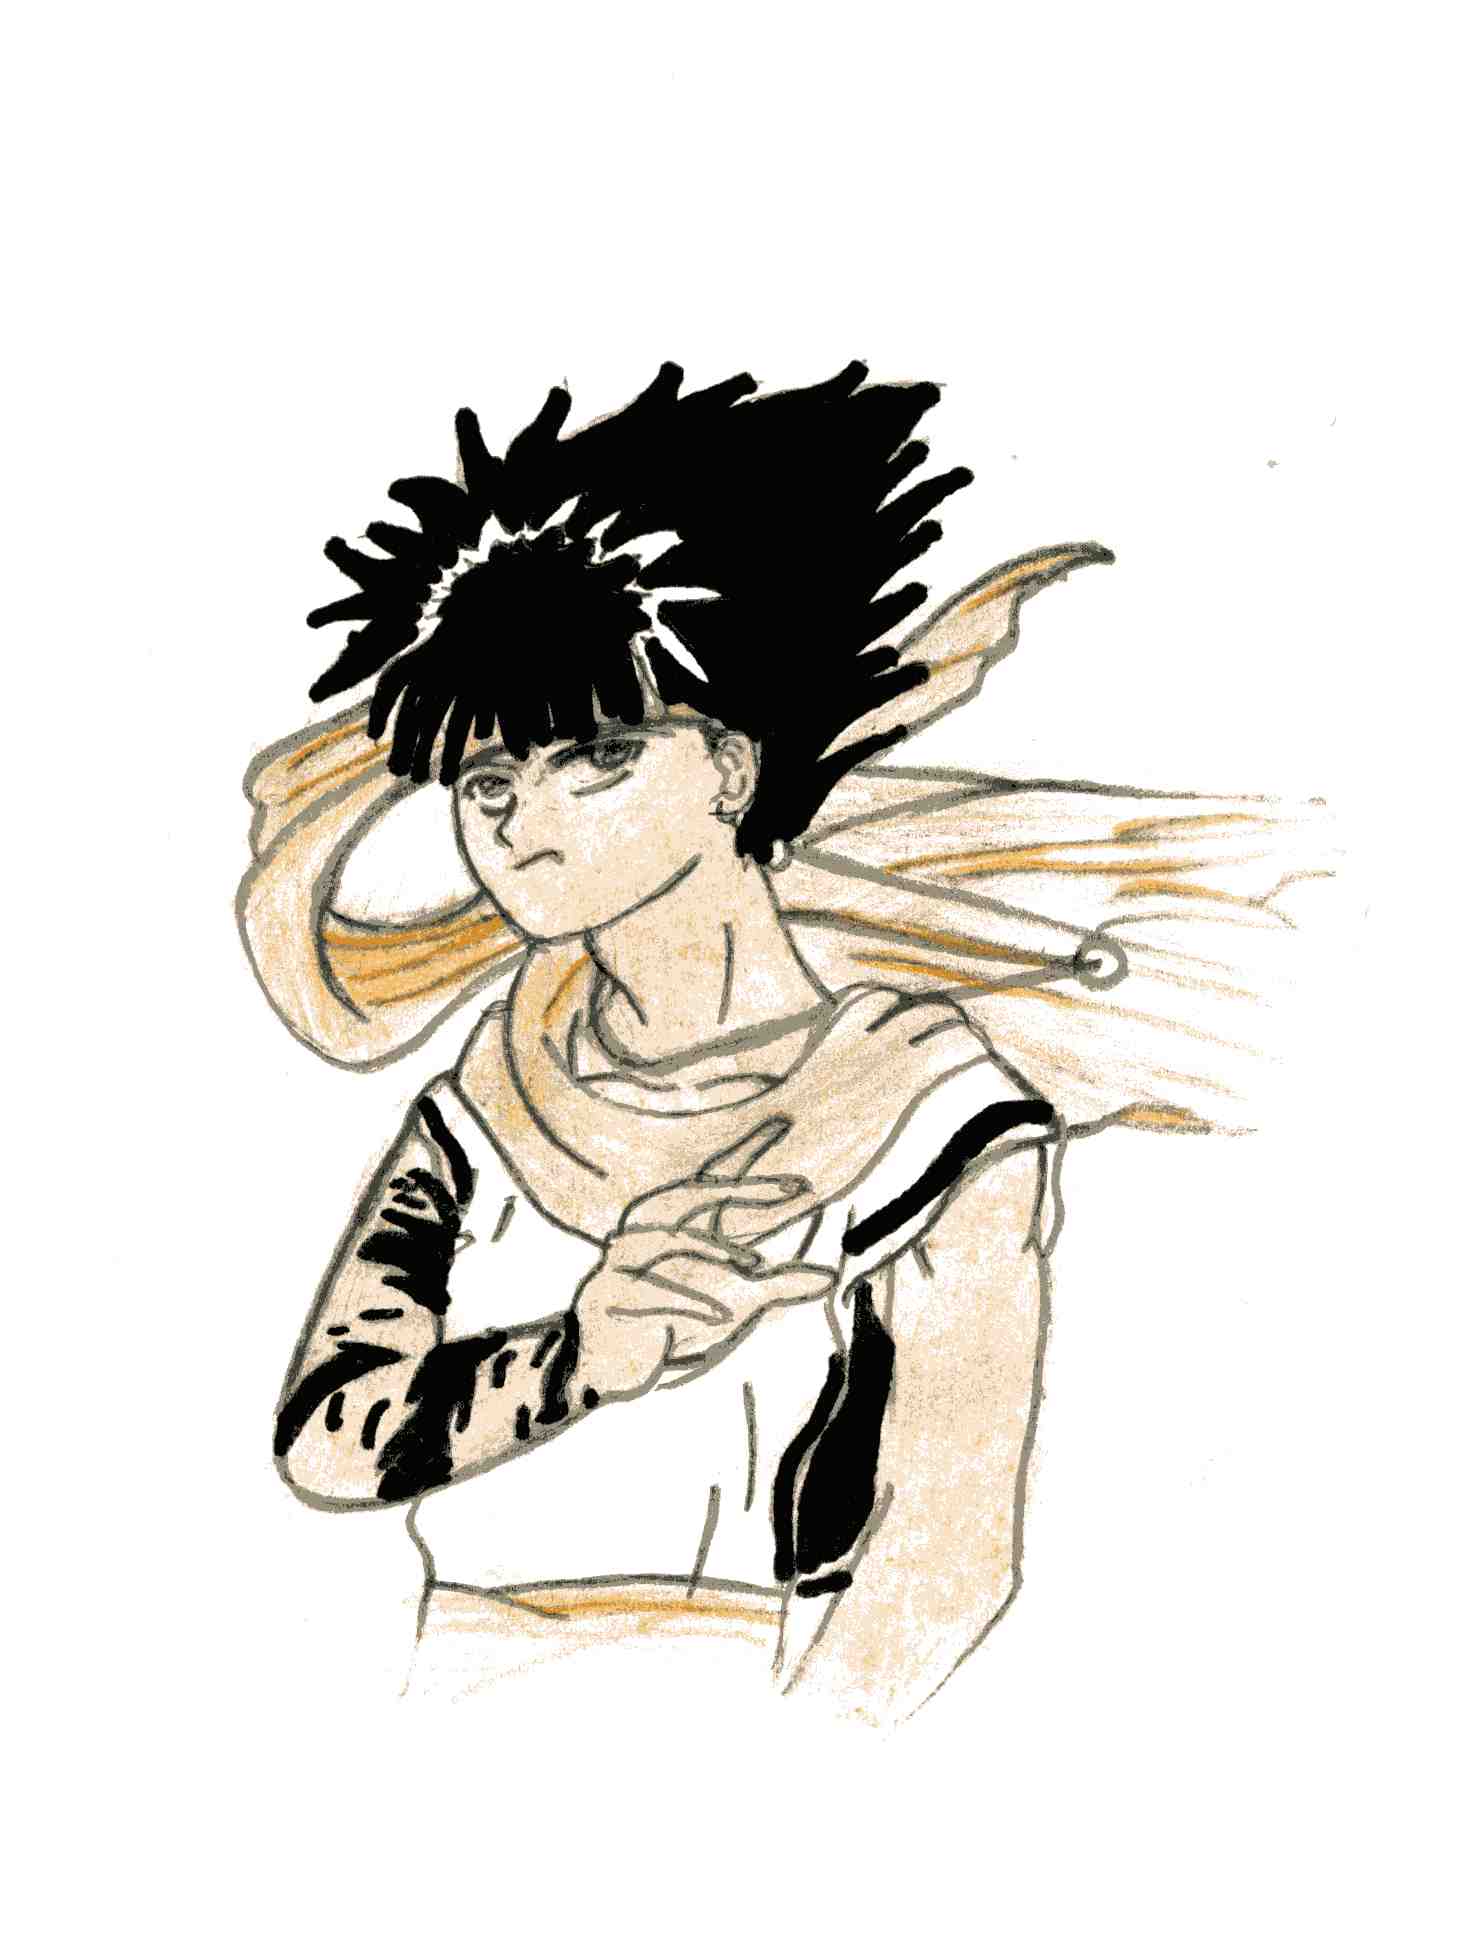 Prince Hiei *request* by PimpShadow